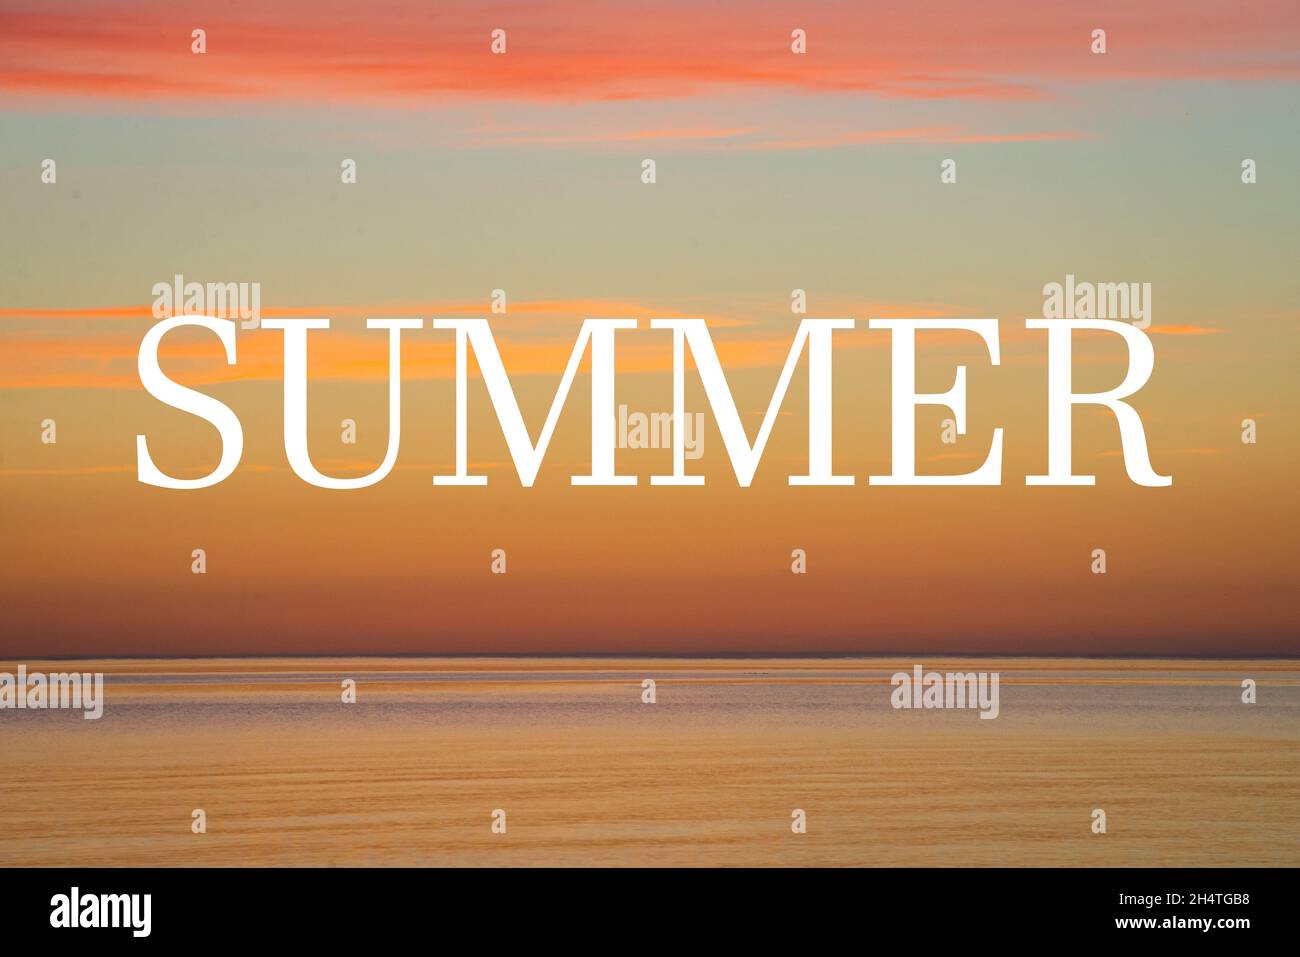 Summer, greeting text on an orange summer sunset background. SUMMER text. The word summer. Creative nature concept. Minimal flat sleep. Poster, banner Stock Photo